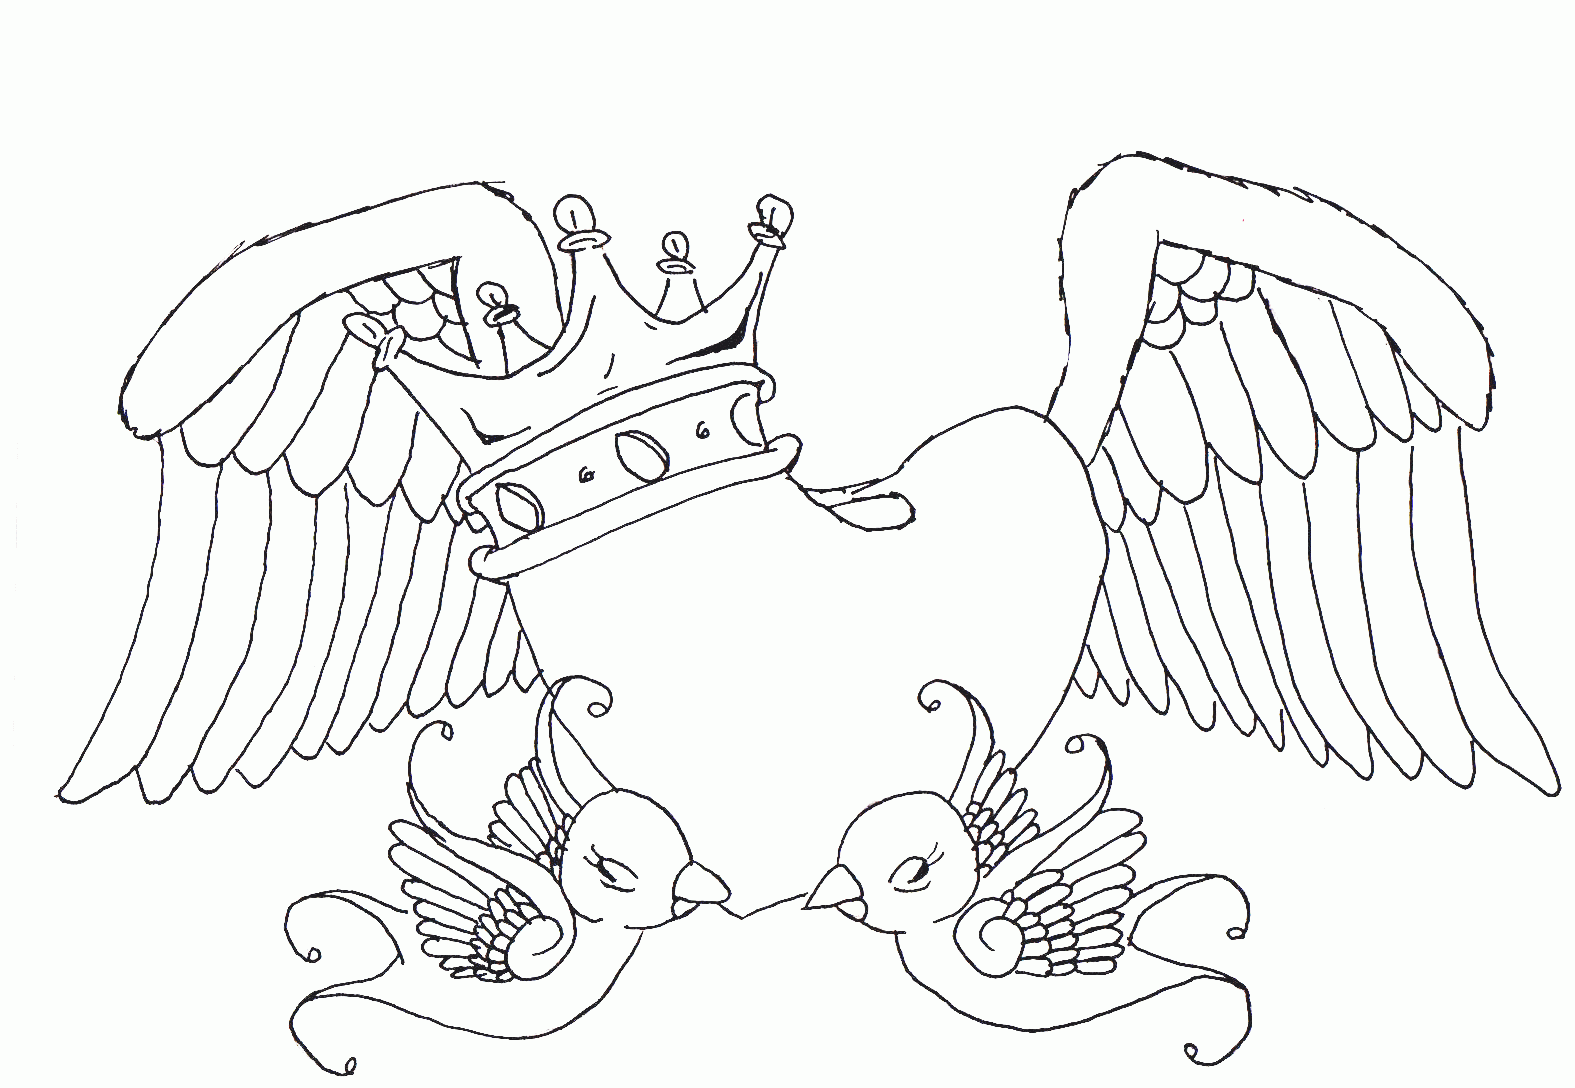 Free Hearts With Wings And Roses Coloring Pages Download Free Clip Art Free Clip Art On Clipart Library Click the hearts and roses coloring pages to view printable version or color it online (compatible with ipad and android tablets). clipart library